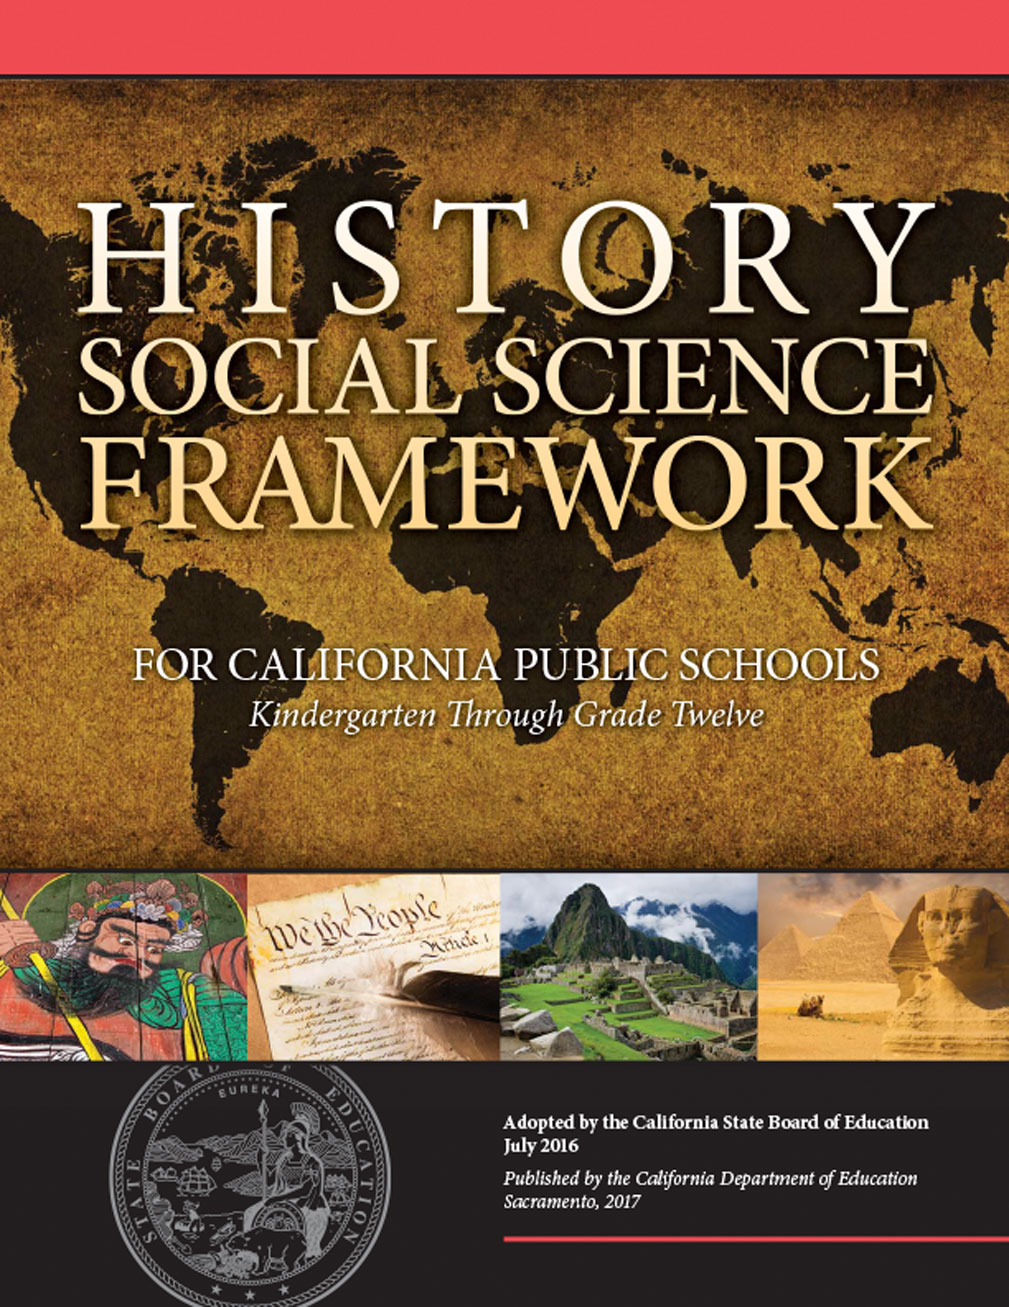 The cover of the History Social Science Framework document